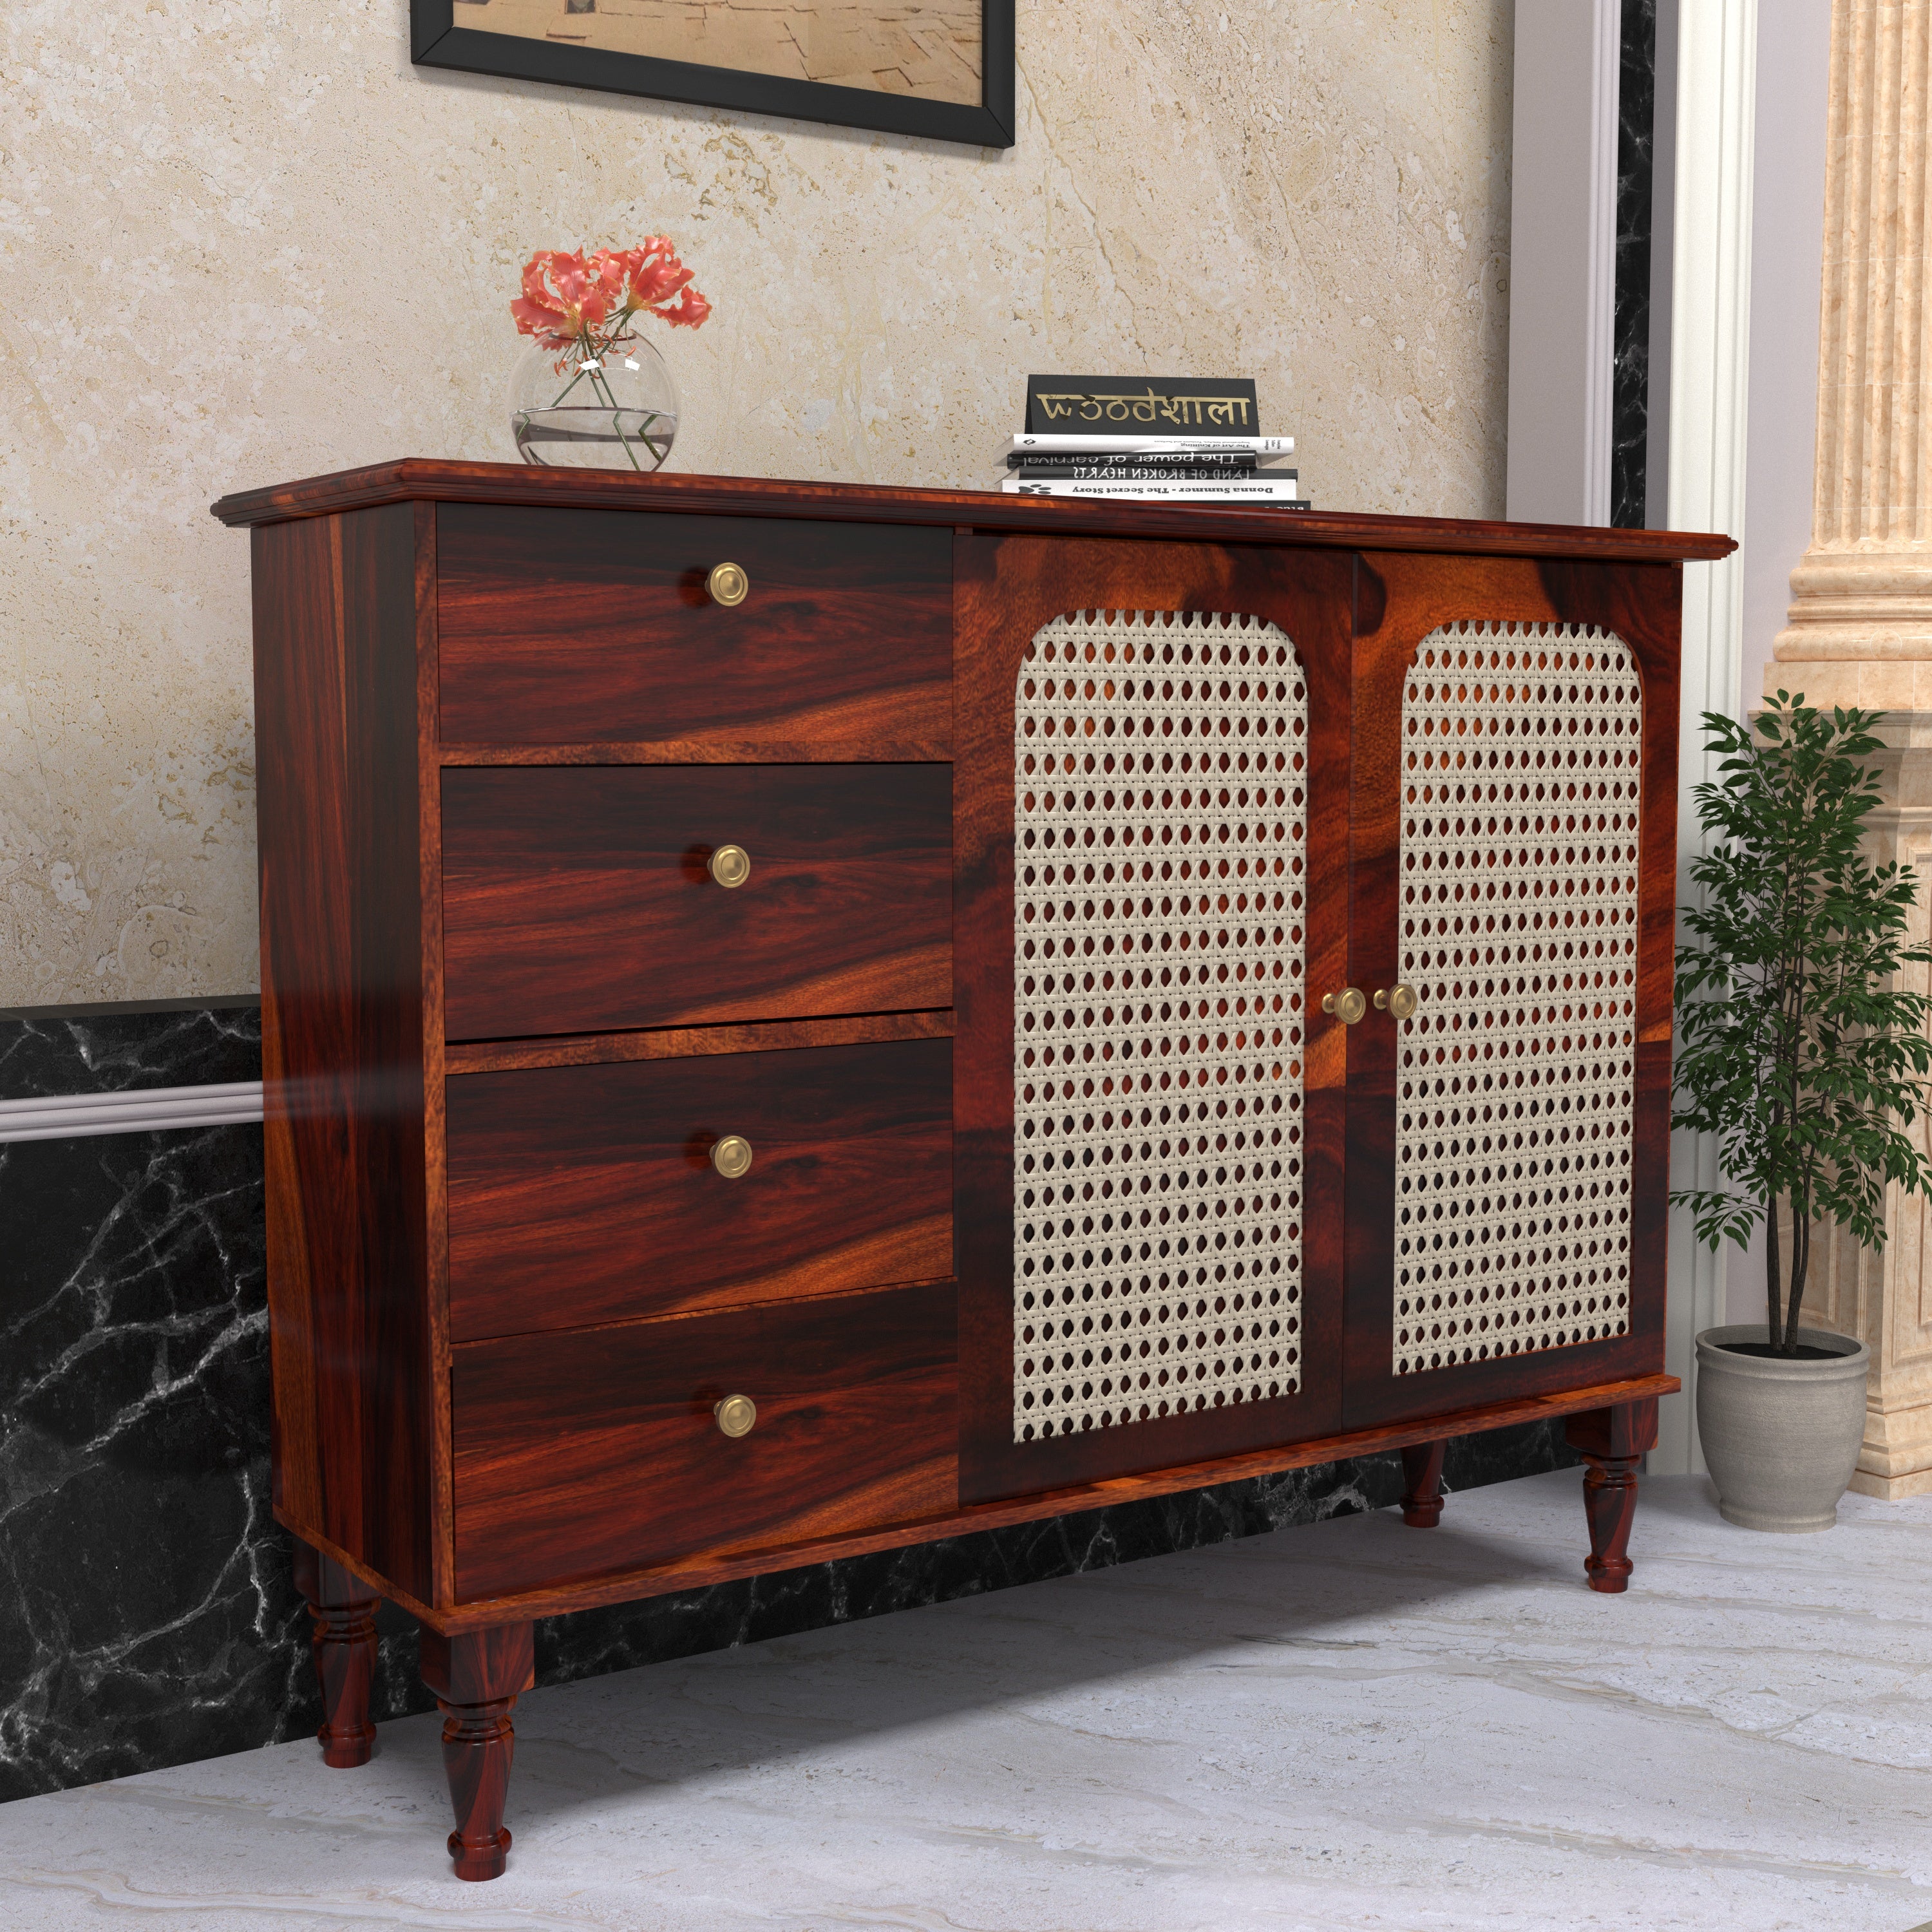 Madrid Multi-storage Light Finish Handmade Wooden Sideboard for Home Cupboard